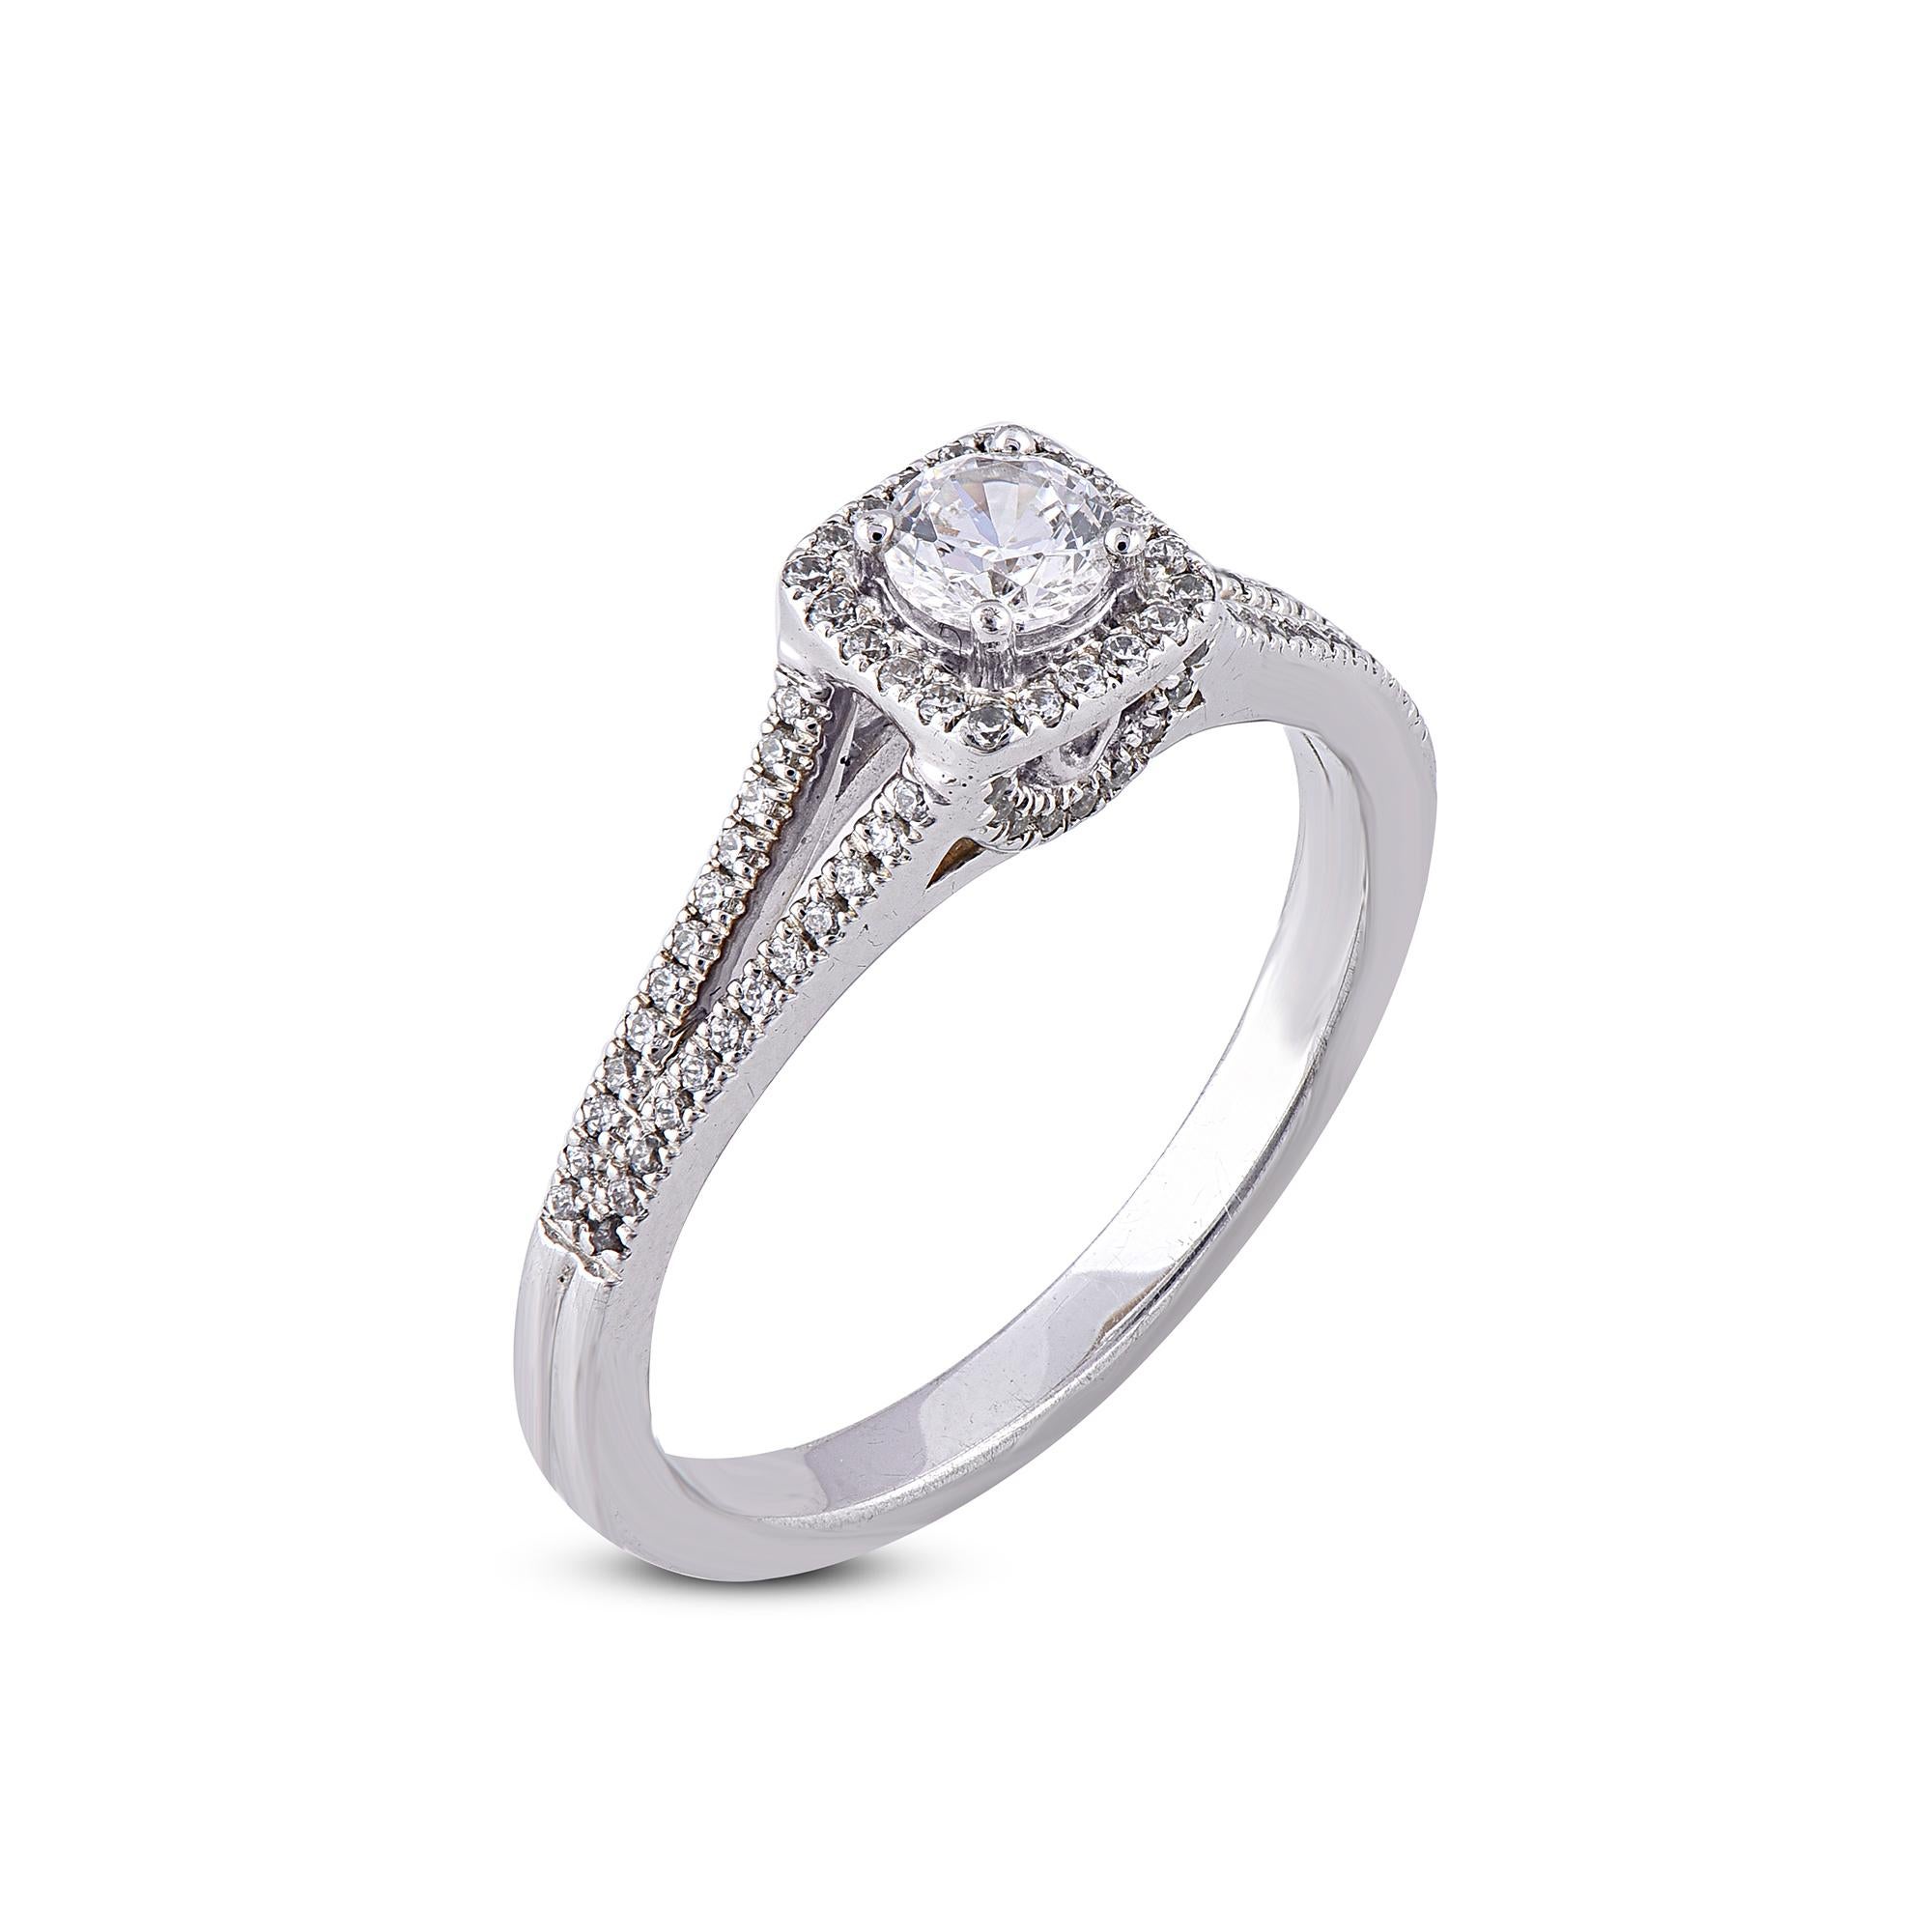 Truly exquisite, this diamond ring is sure to be admired for the inherent classic beauty and elegance within its design. This engagement ring features 0.50 carat of 87 round diamond studded in Pave and Prong setting. The diamonds are natural,